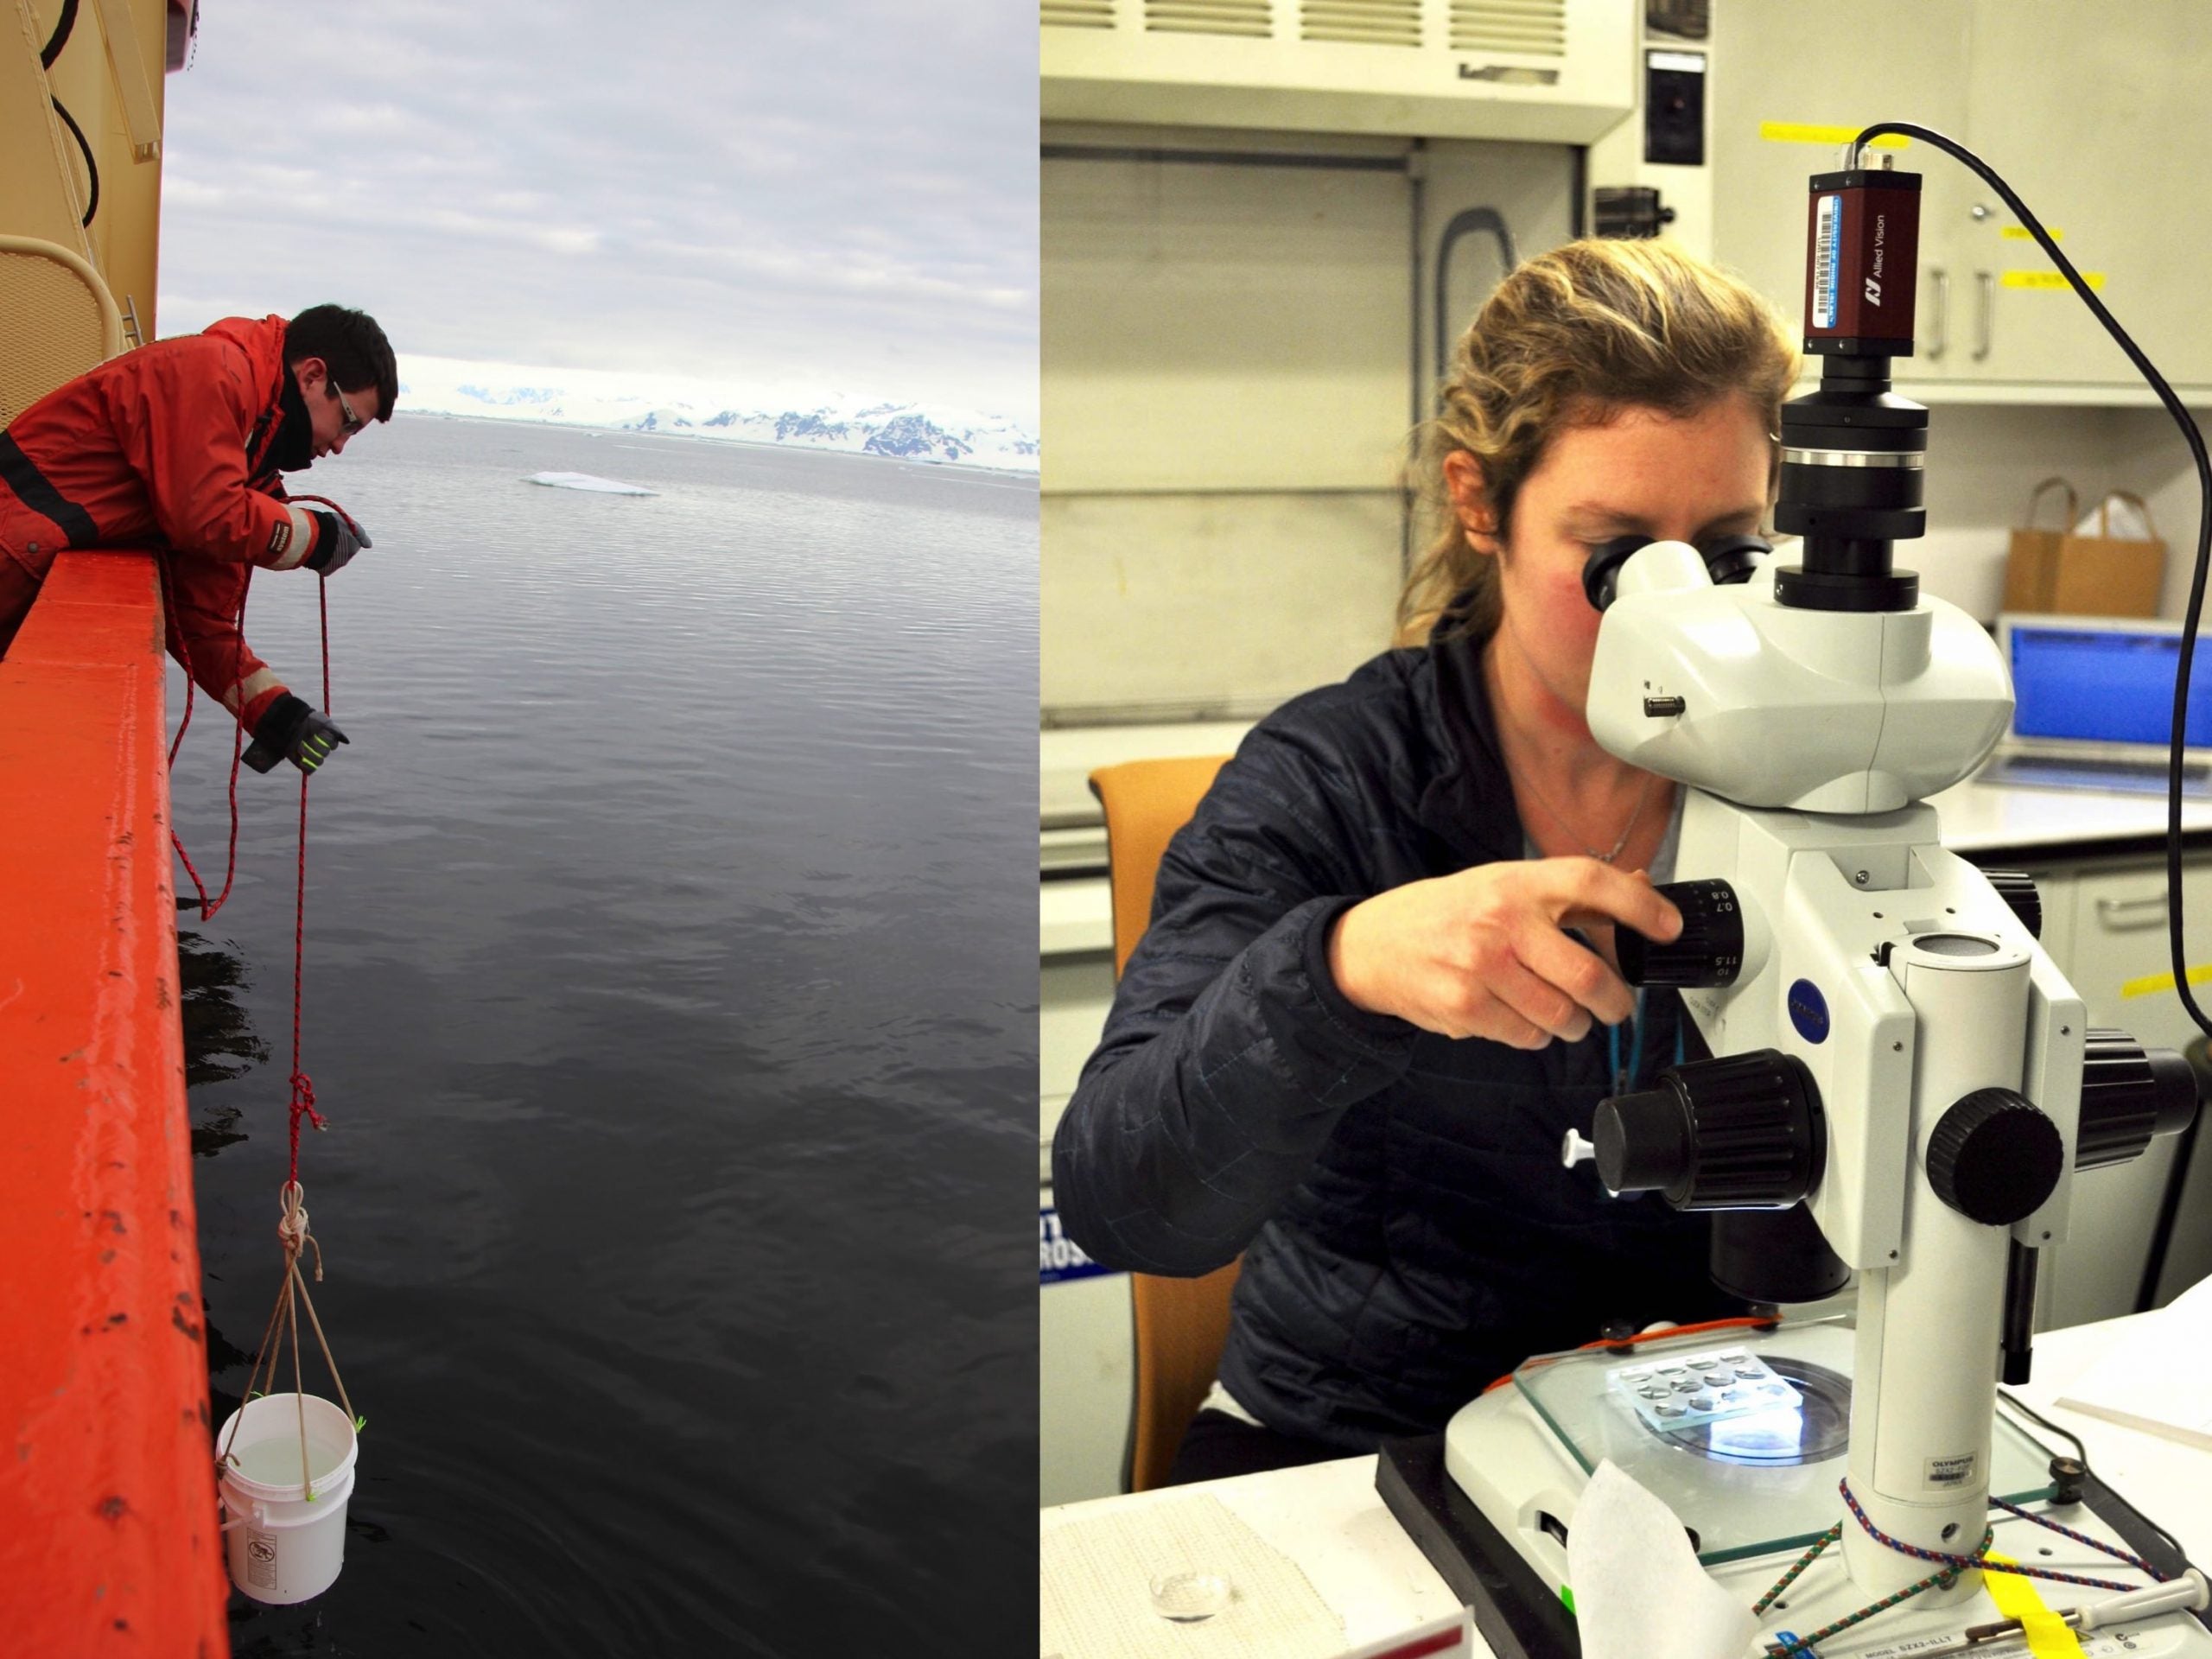 Collecting surface phytoplankton using a bucket (left) and viewing the same phytoplankton under a microscope (right).